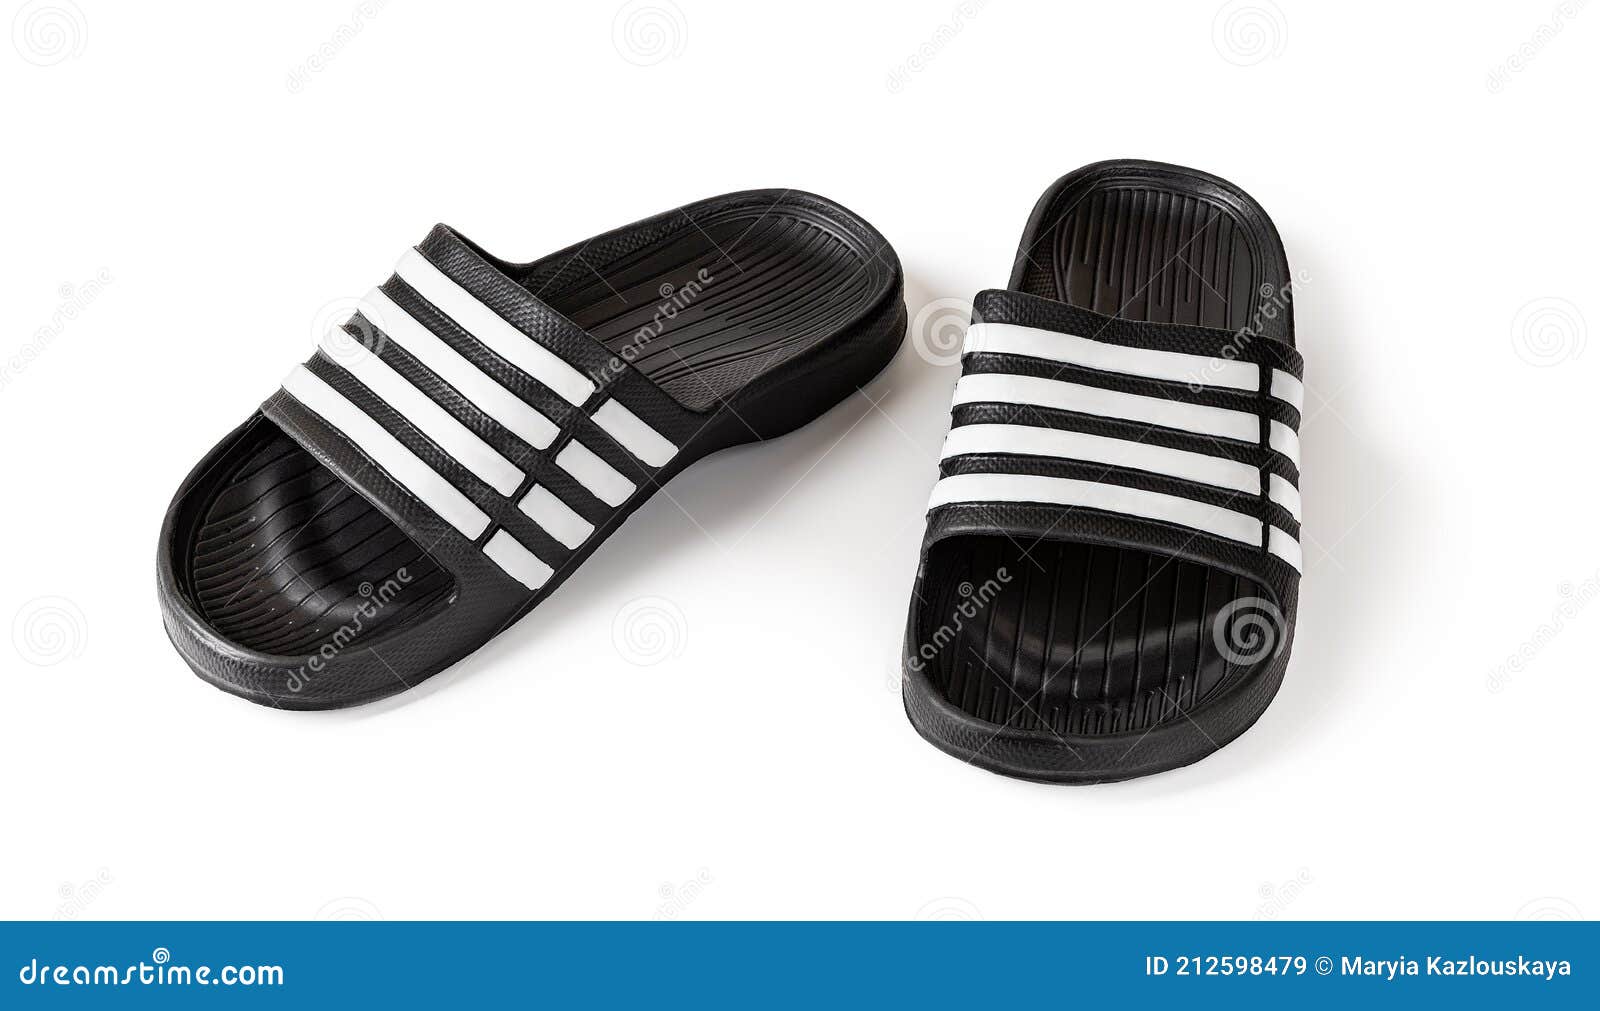 pair of slide sandals  on white. black rubber slippers closeup. light shoes for pool or shower. comfortable beach flip